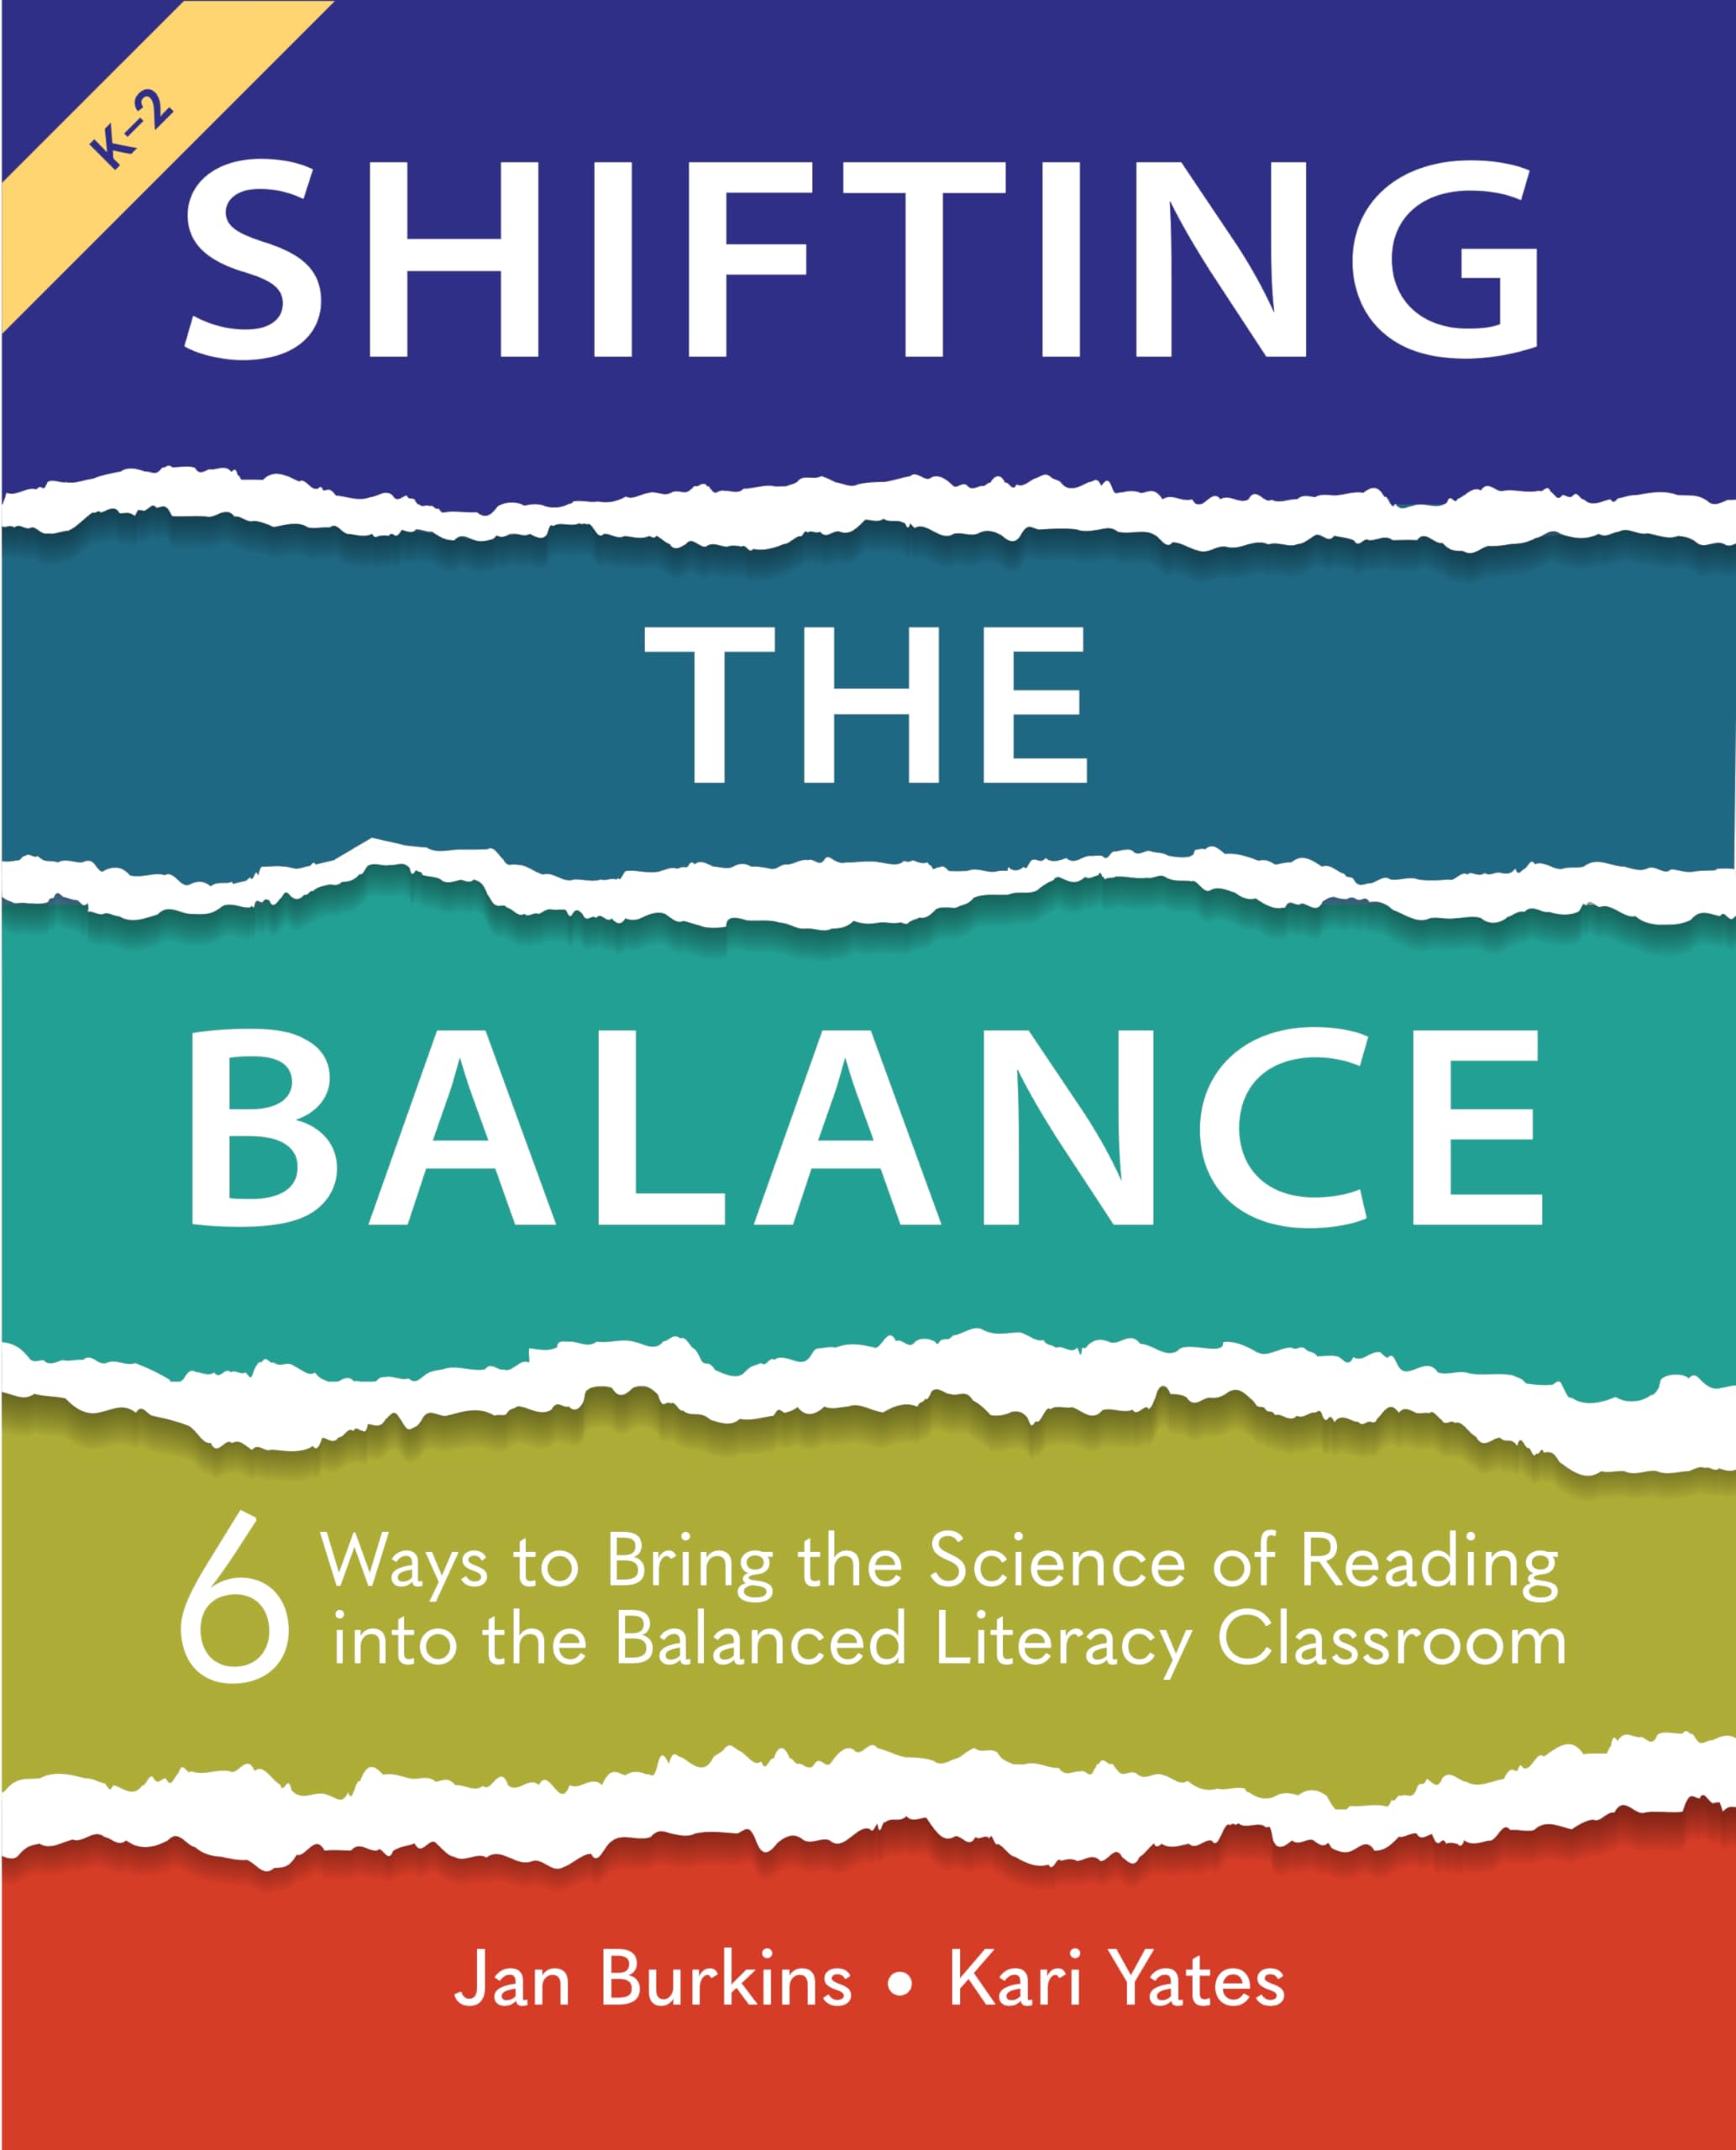 Shifting the Balance: 6 Ways to Bring the Science of Reading Into the Balanced Literacy Classroom by Burkins, Jan